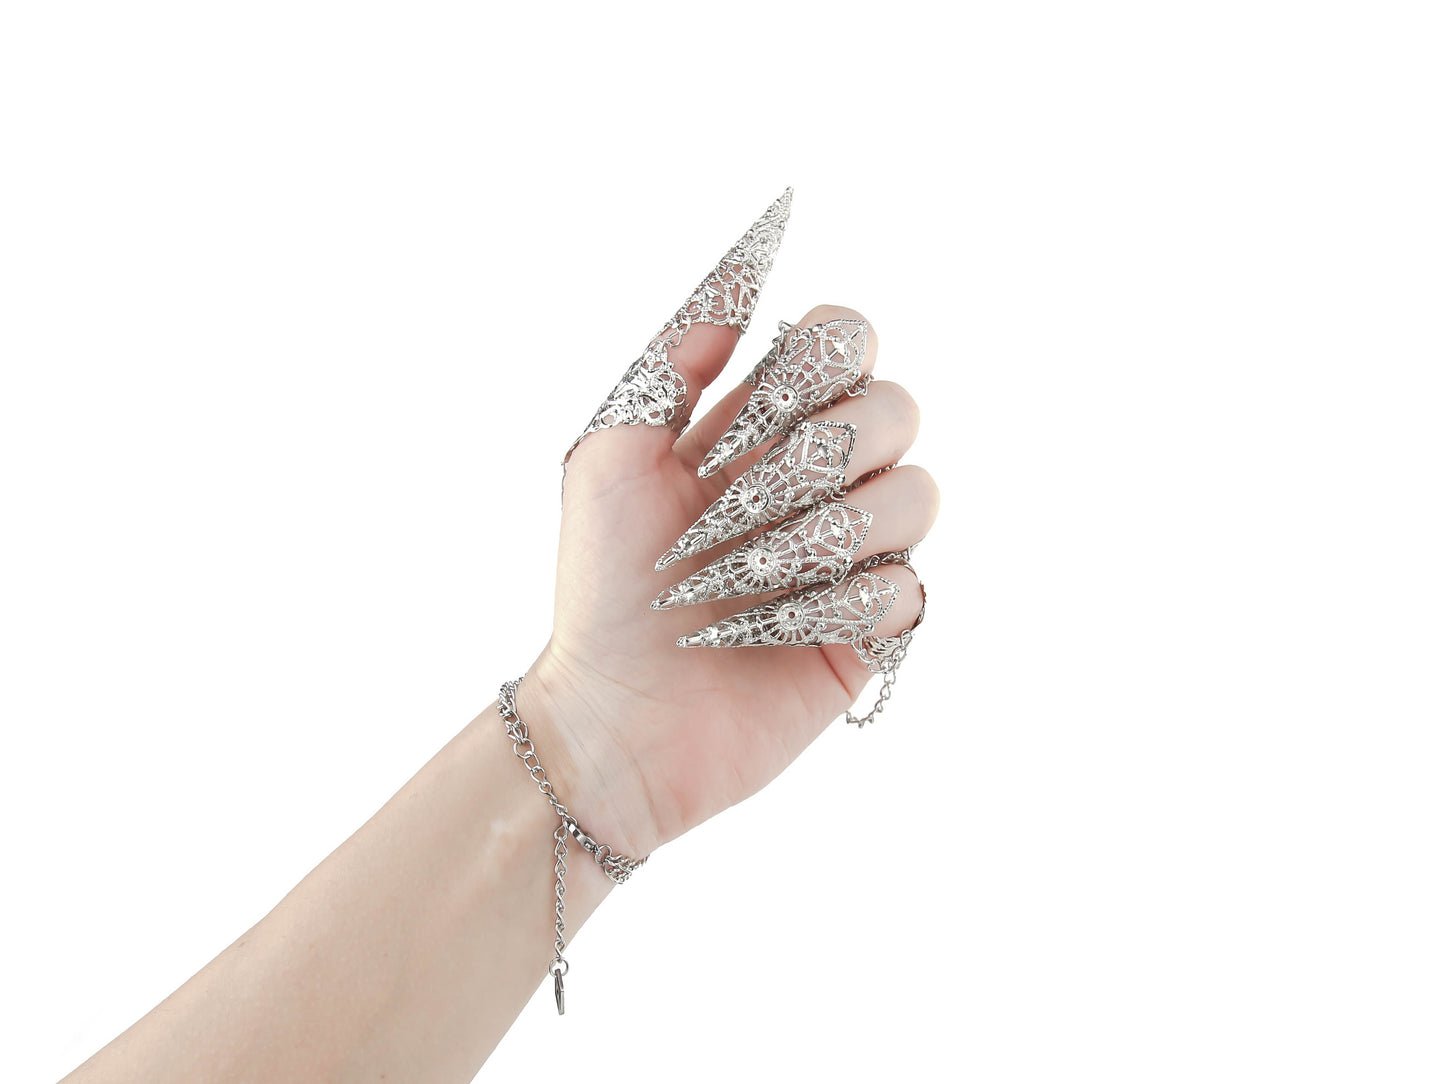 A hand dons a striking metal glove with finger claw rings, intricately designed by Myril Jewels. It's a blend of gothic-chic and neo-goth finesse, perfect for those seeking bold witchcore jewelry to accent their Halloween ensemble or to make a statement at a rave party